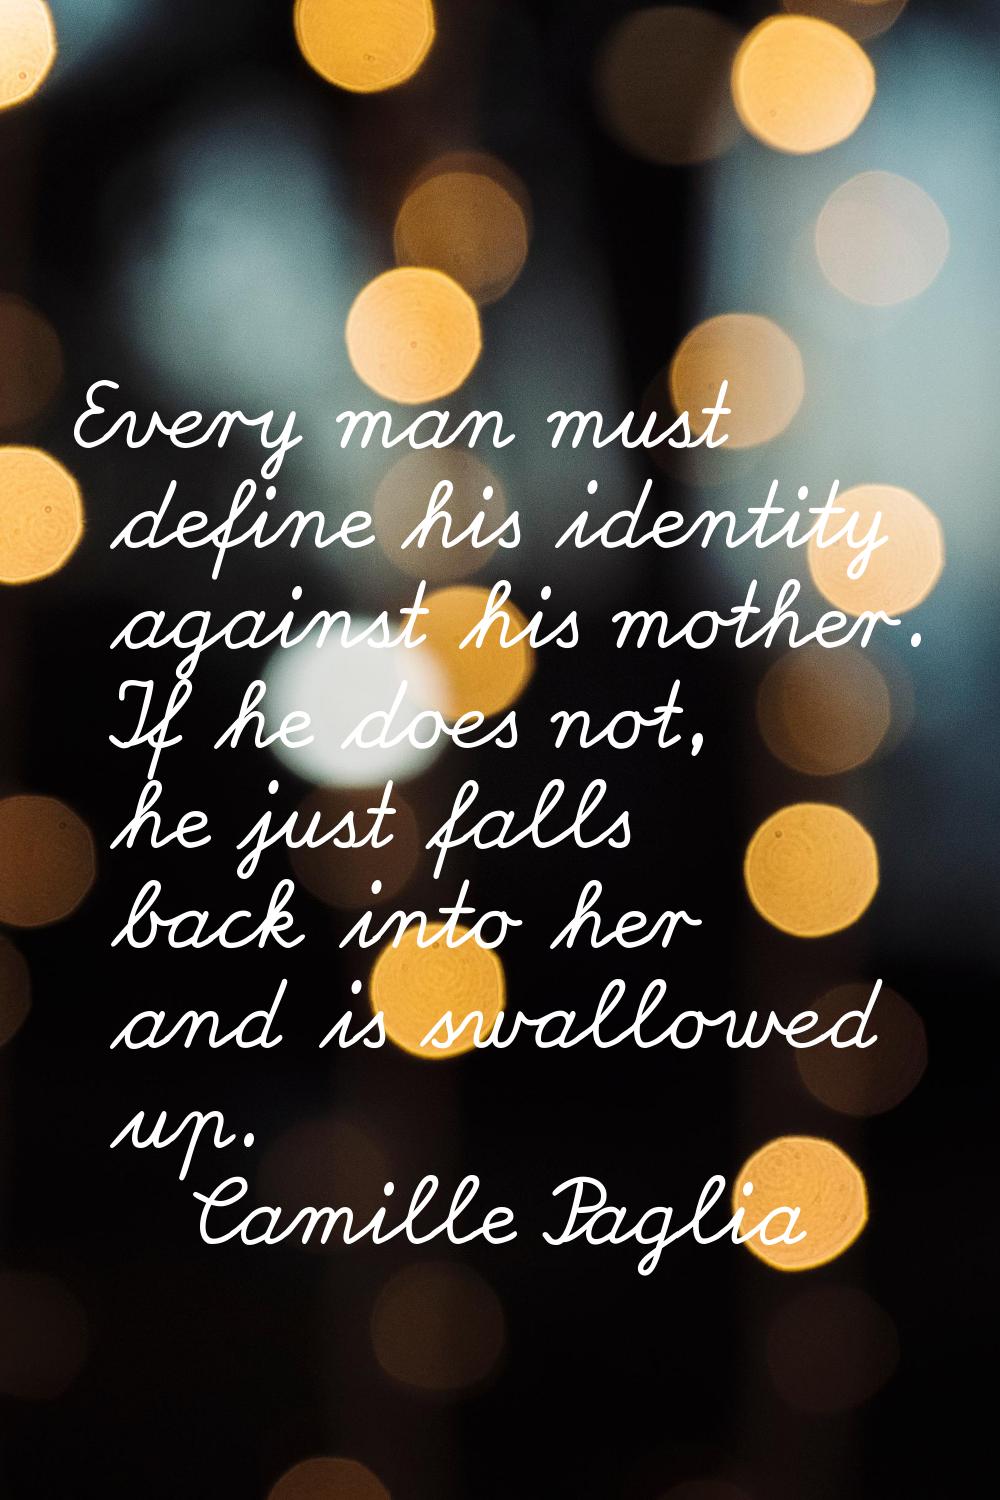 Every man must define his identity against his mother. If he does not, he just falls back into her 